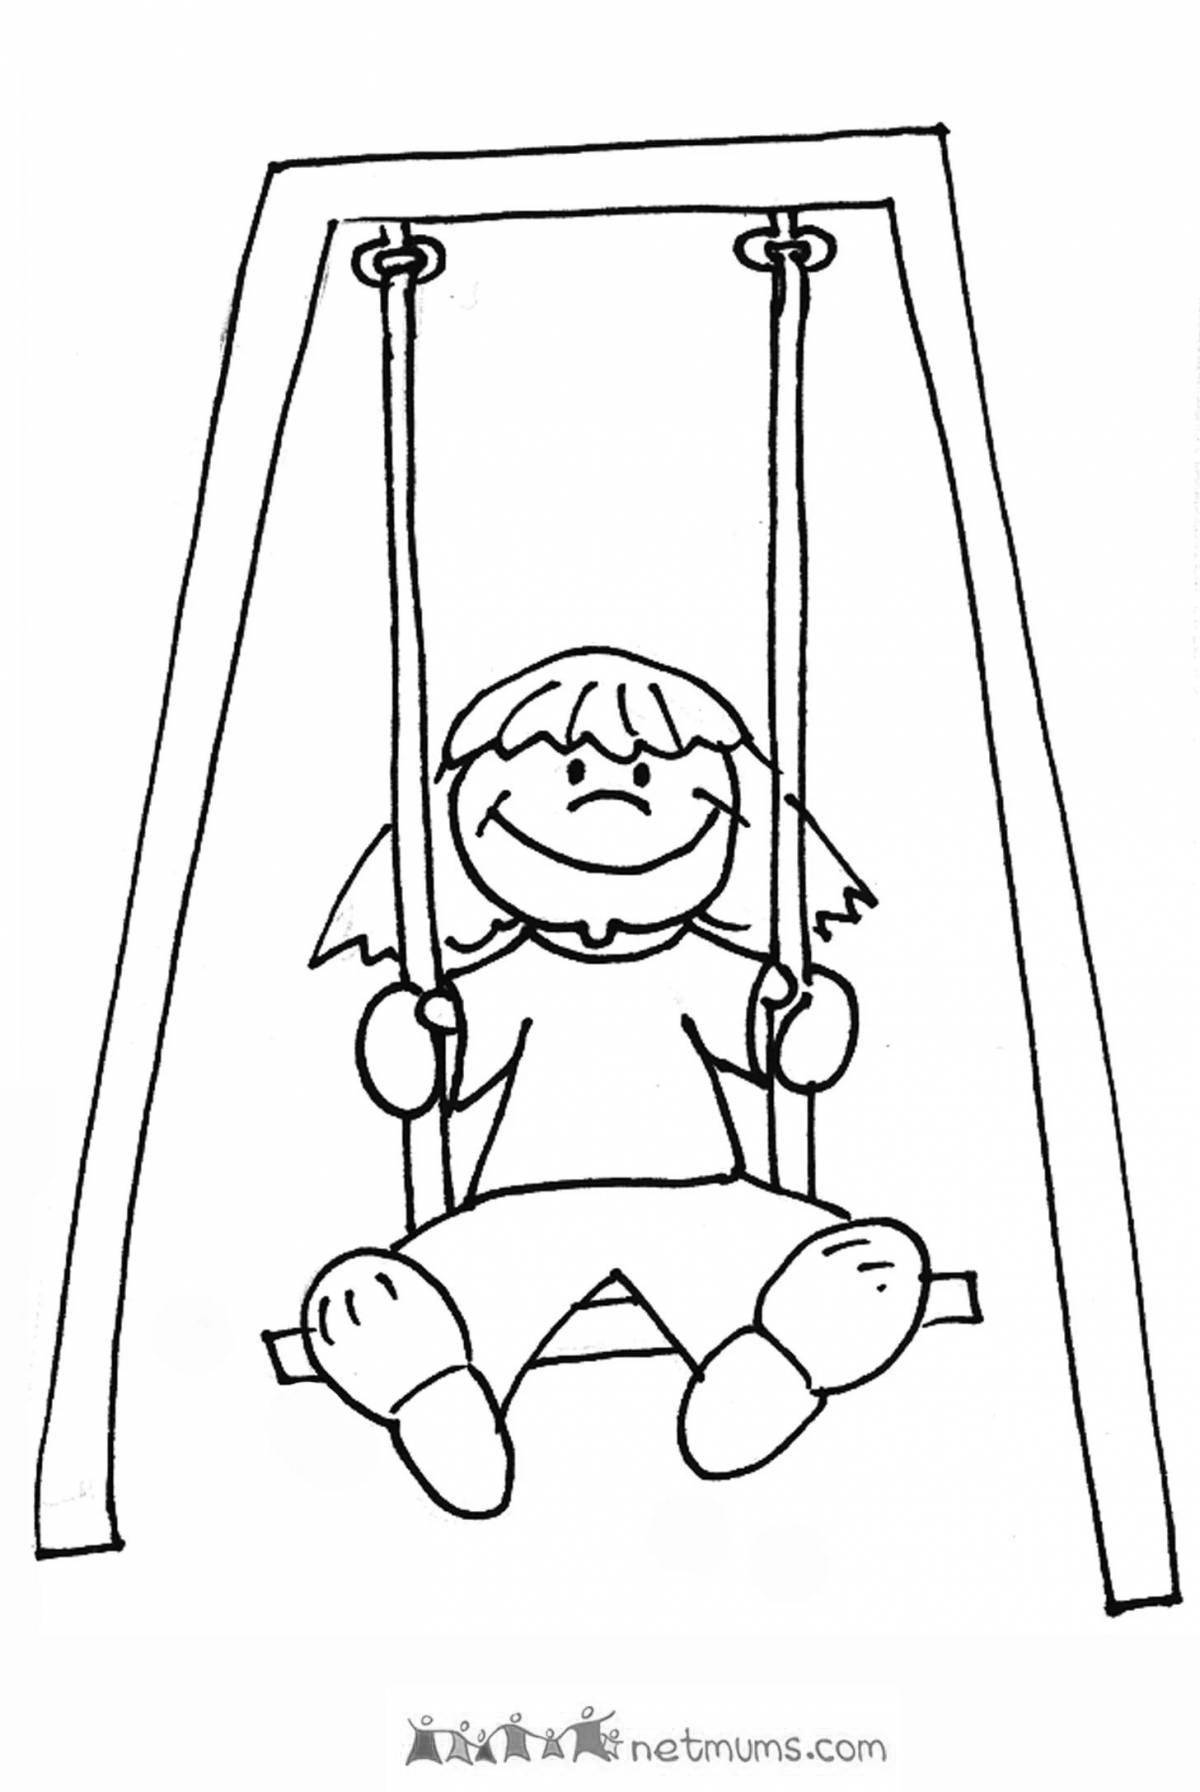 Sparkling Juvenile Swing Coloring Page